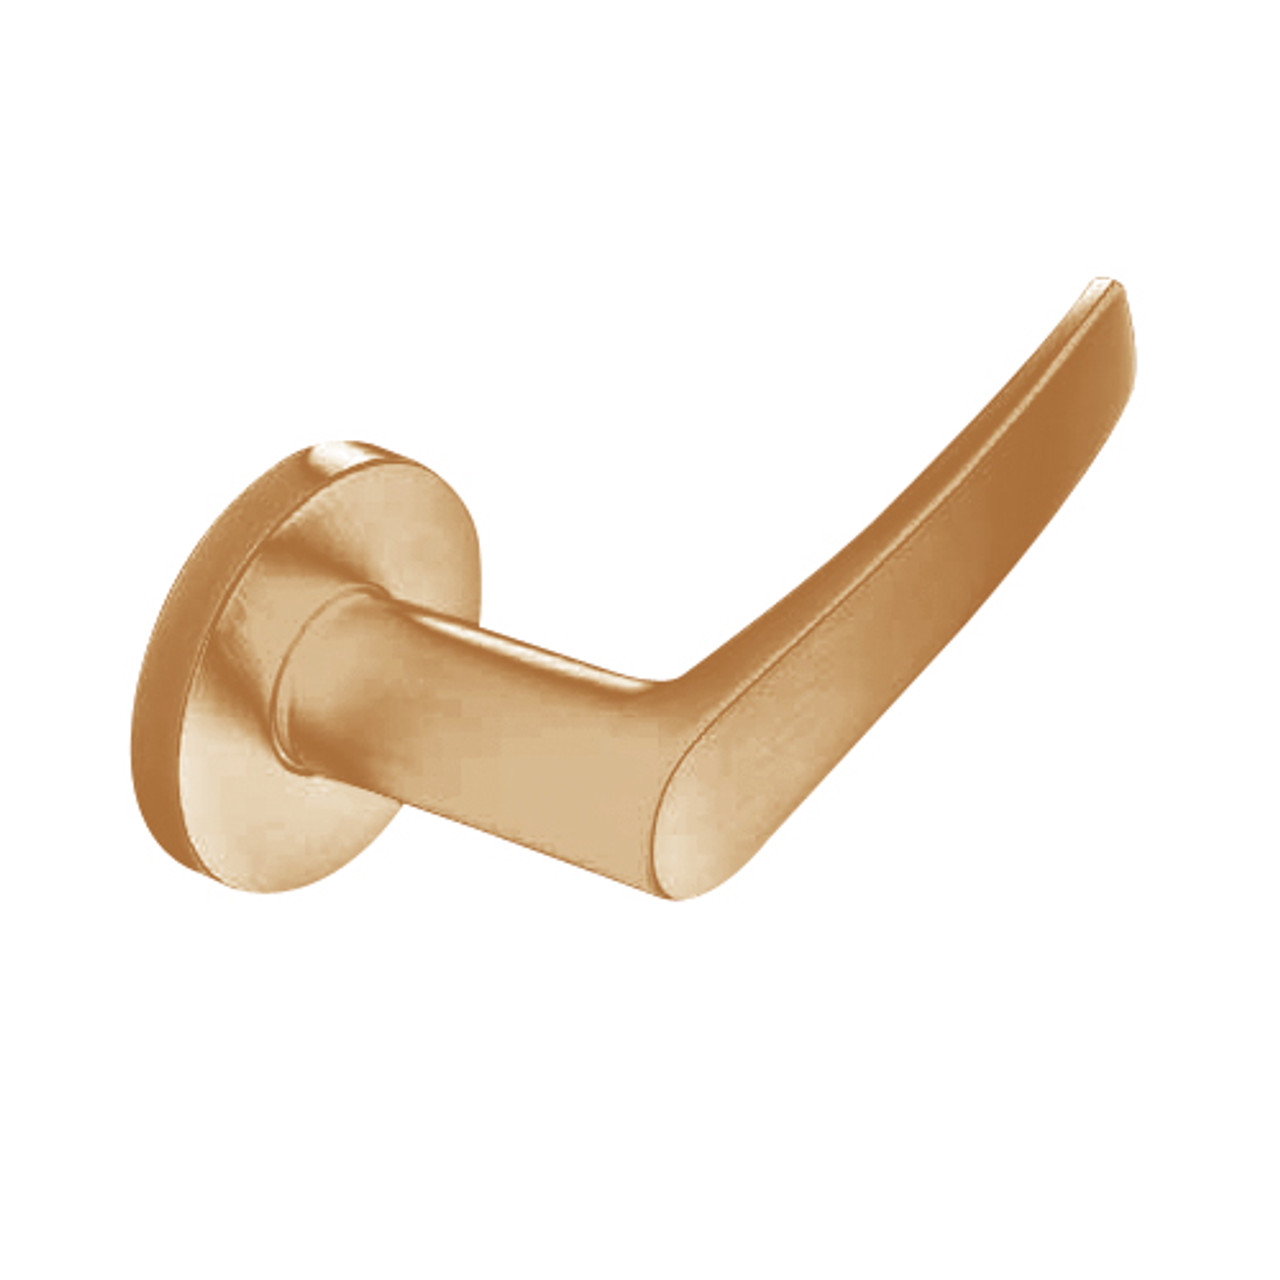 ML2020-ASB-612 Corbin Russwin ML2000 Series Mortise Privacy Locksets with Armstrong Lever in Satin Bronze